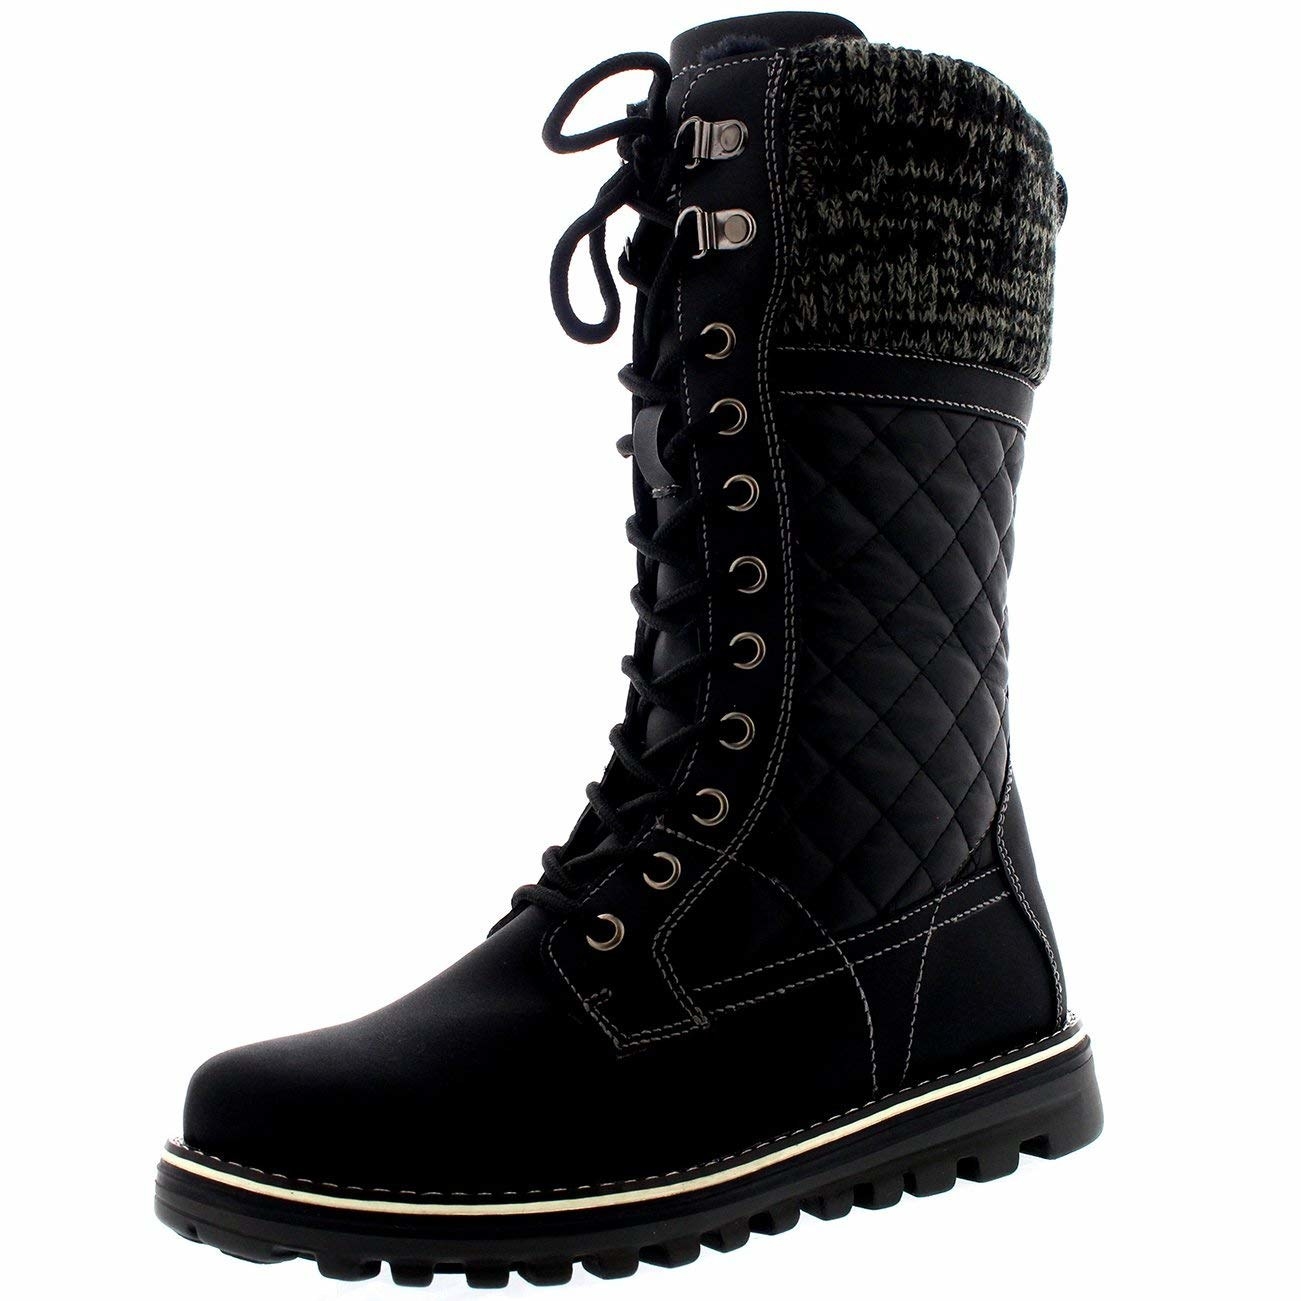 PPXID Boys Girls Warm Winter Snow Boot Leather Ankle Combat Boots Outdoor Hiking Boots